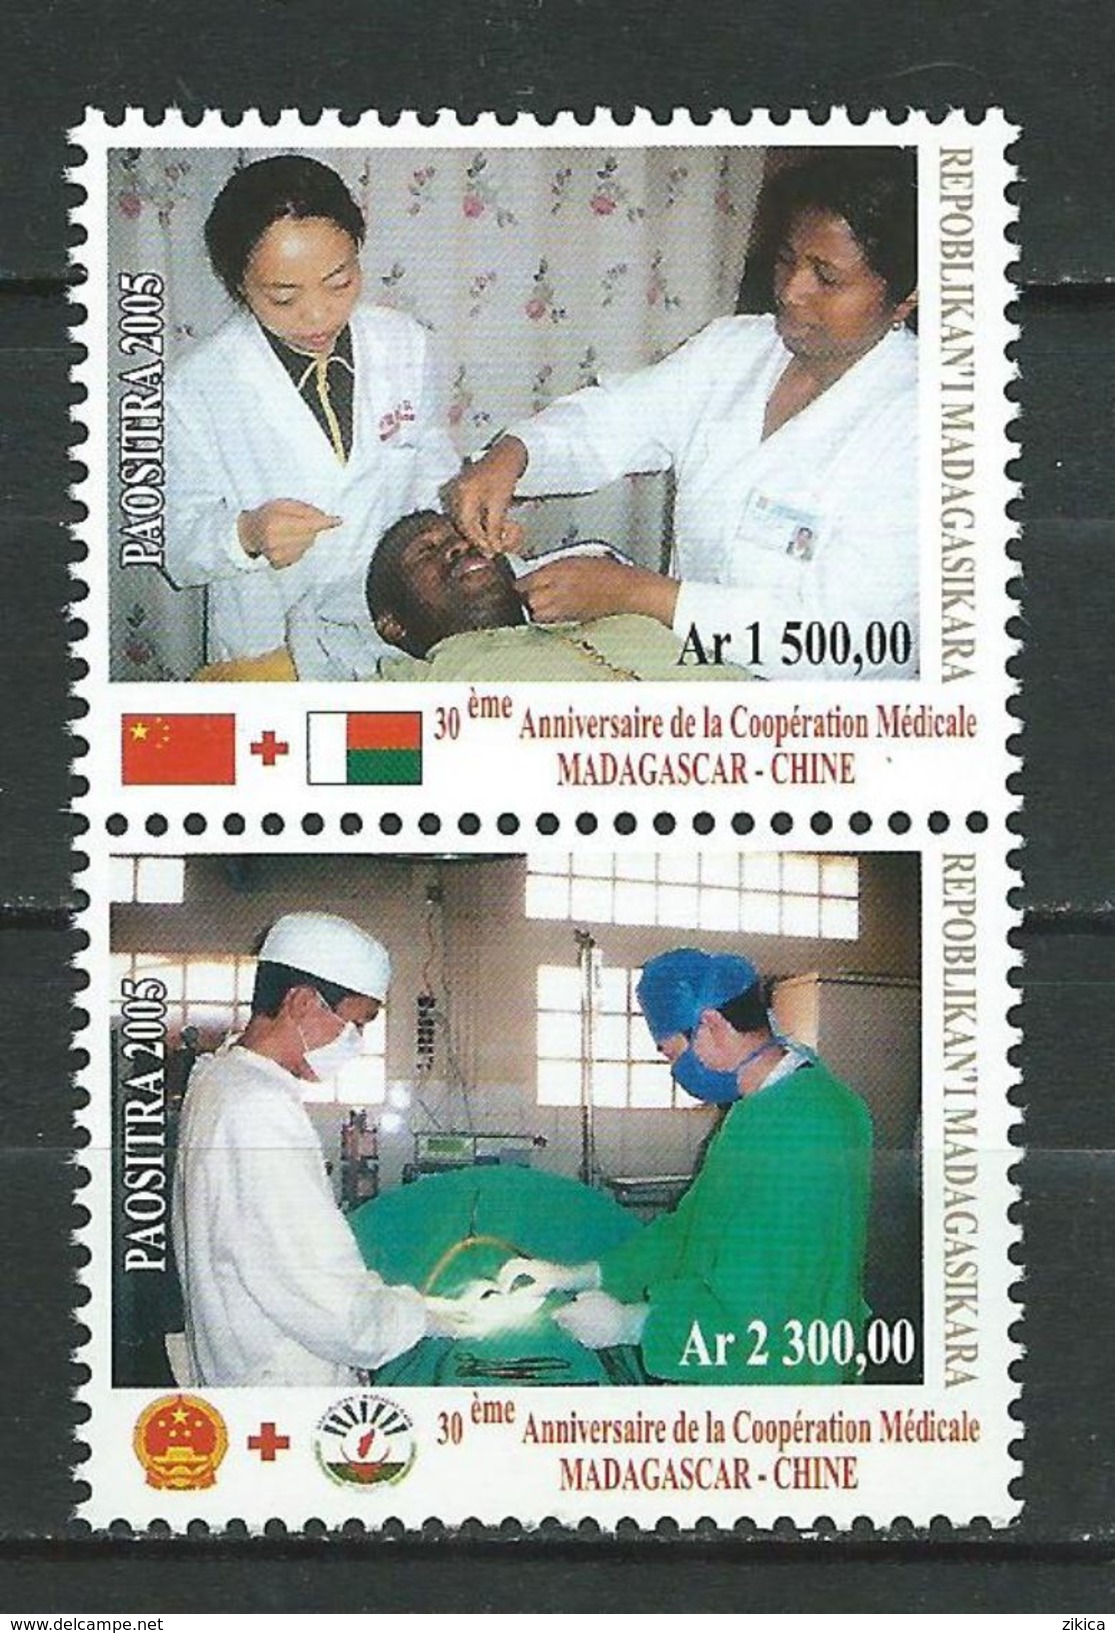 Madagascar 2005 The 30th Ann. Of Cooperation Of Madagascar And China For Health Service. Red Cross. Medicine. MNH - Madagaskar (1960-...)